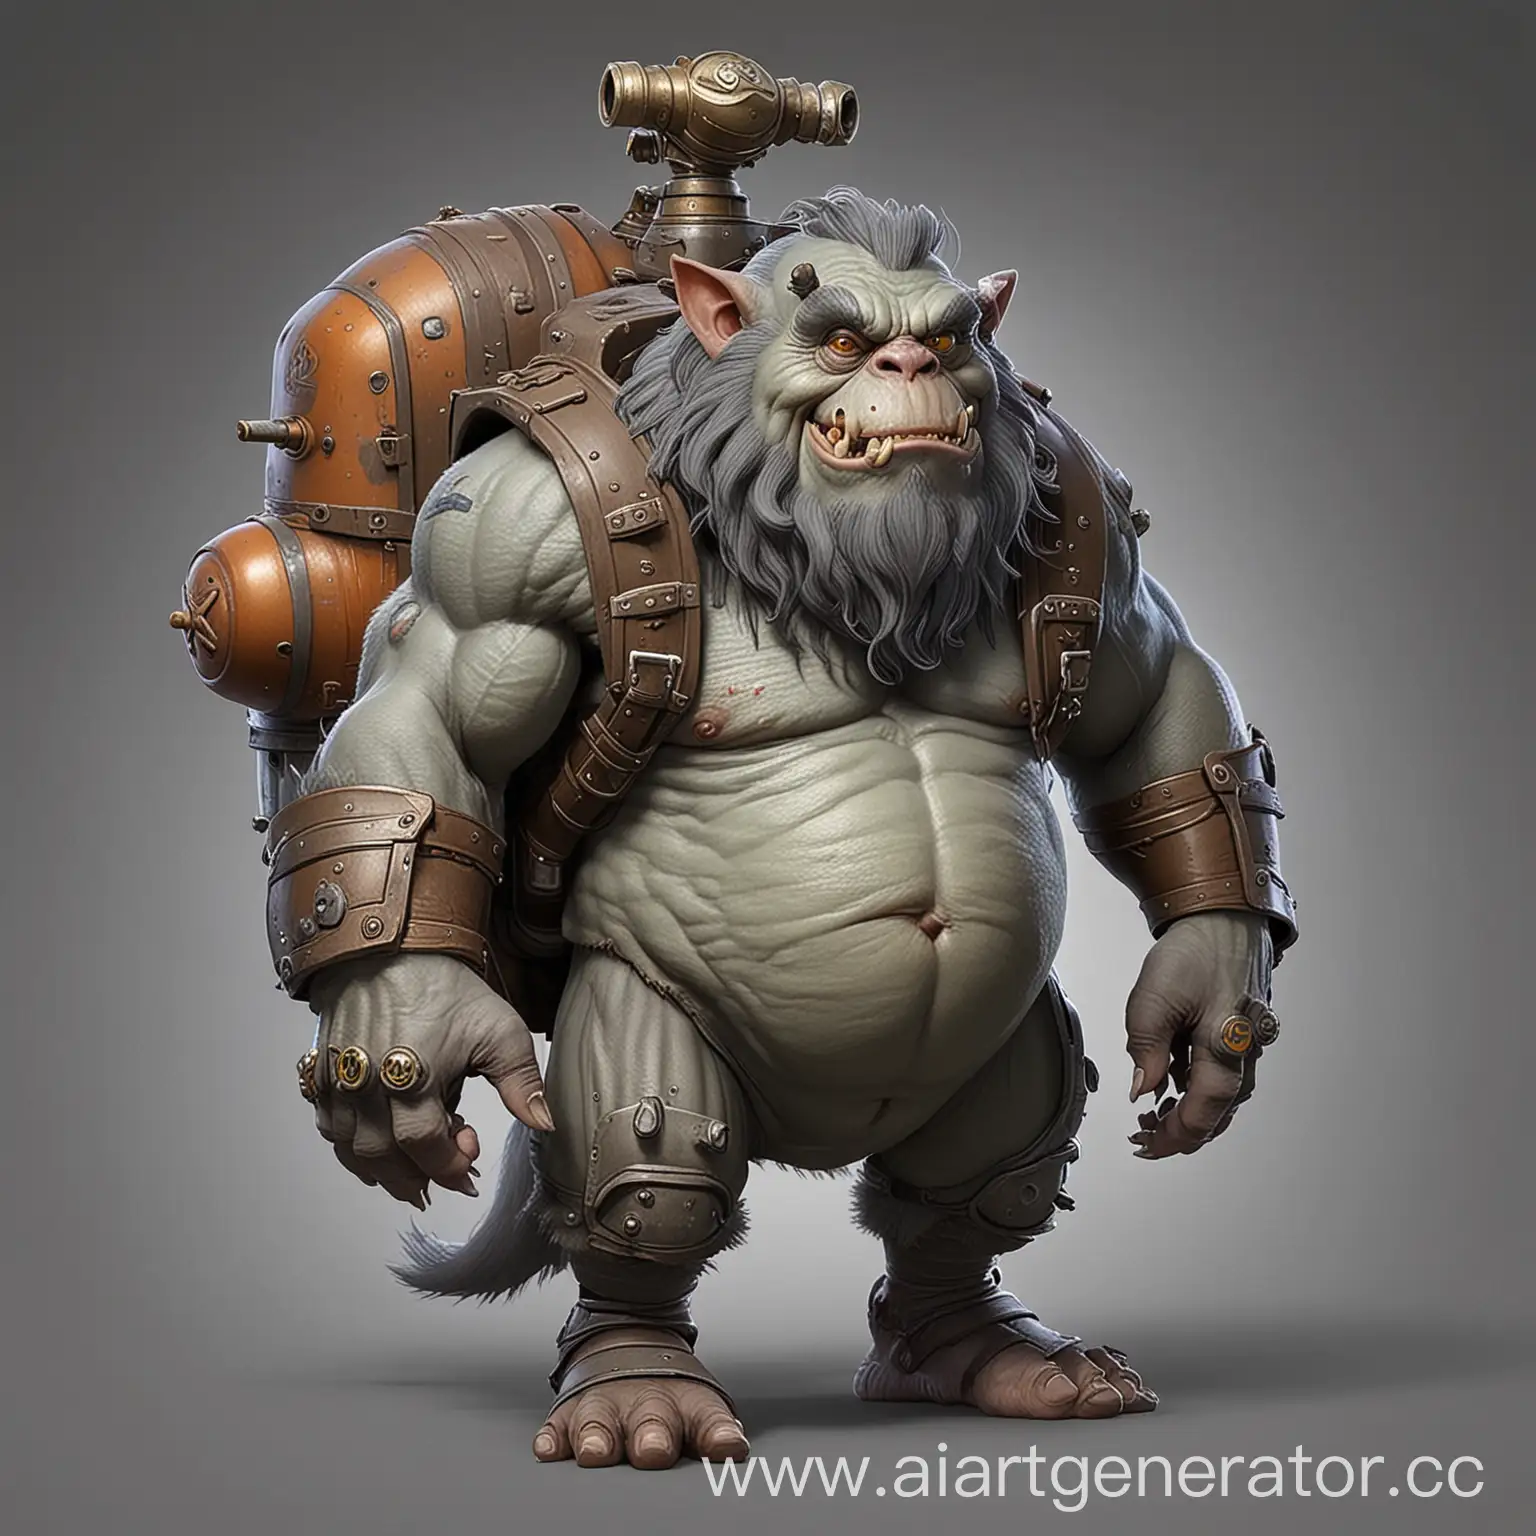 world of warcraft's Grobbulus but gray and with a gas can on his back
